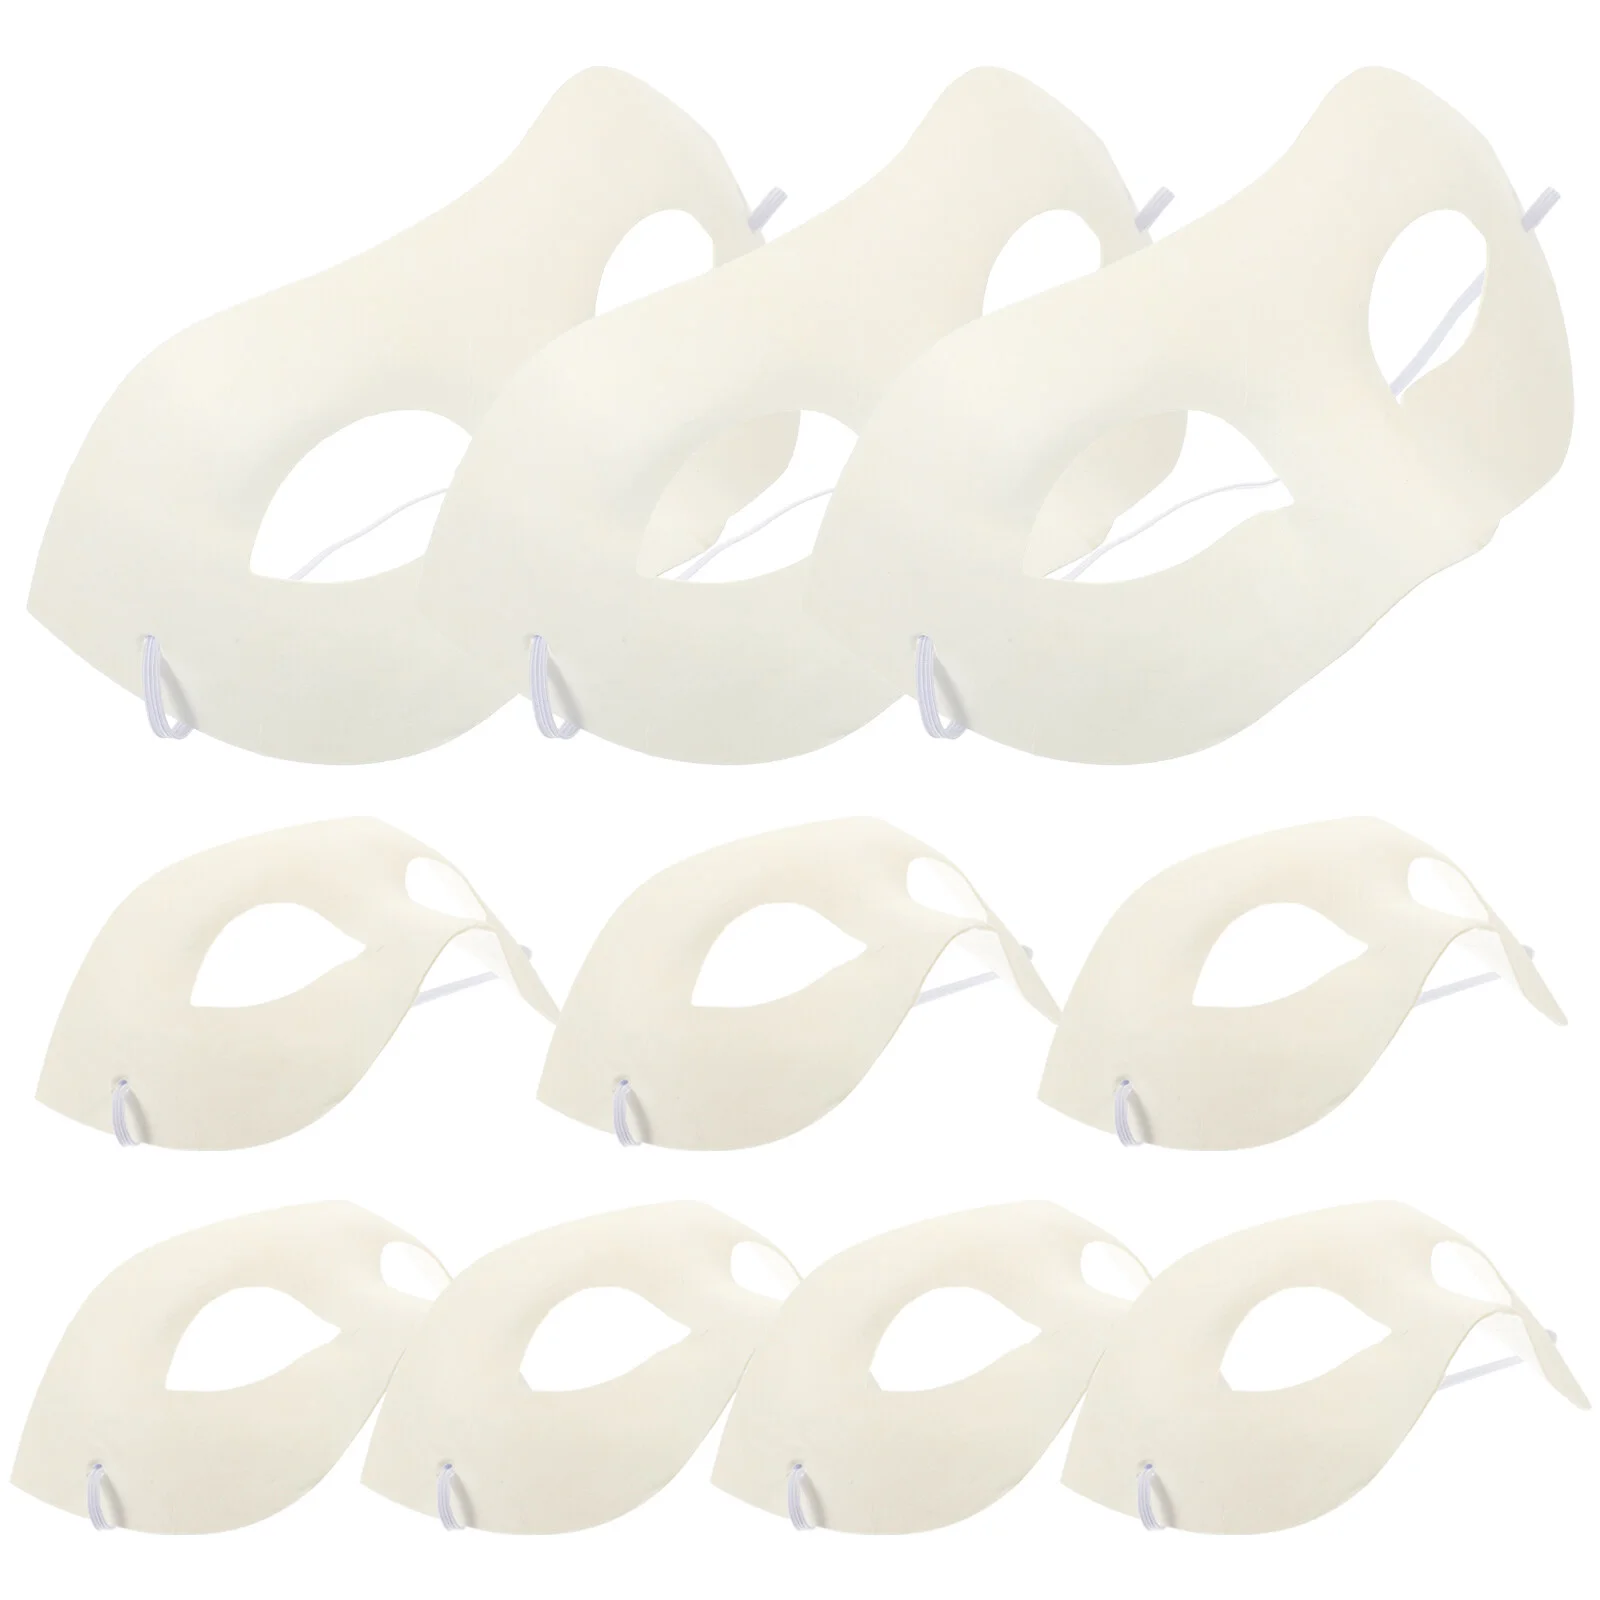 

10 Pcs DIY Hand Painted Mask Cosplay White Halloween Makeup Masquerade Women Paper Craft Blanks Masks Party Painting Miss